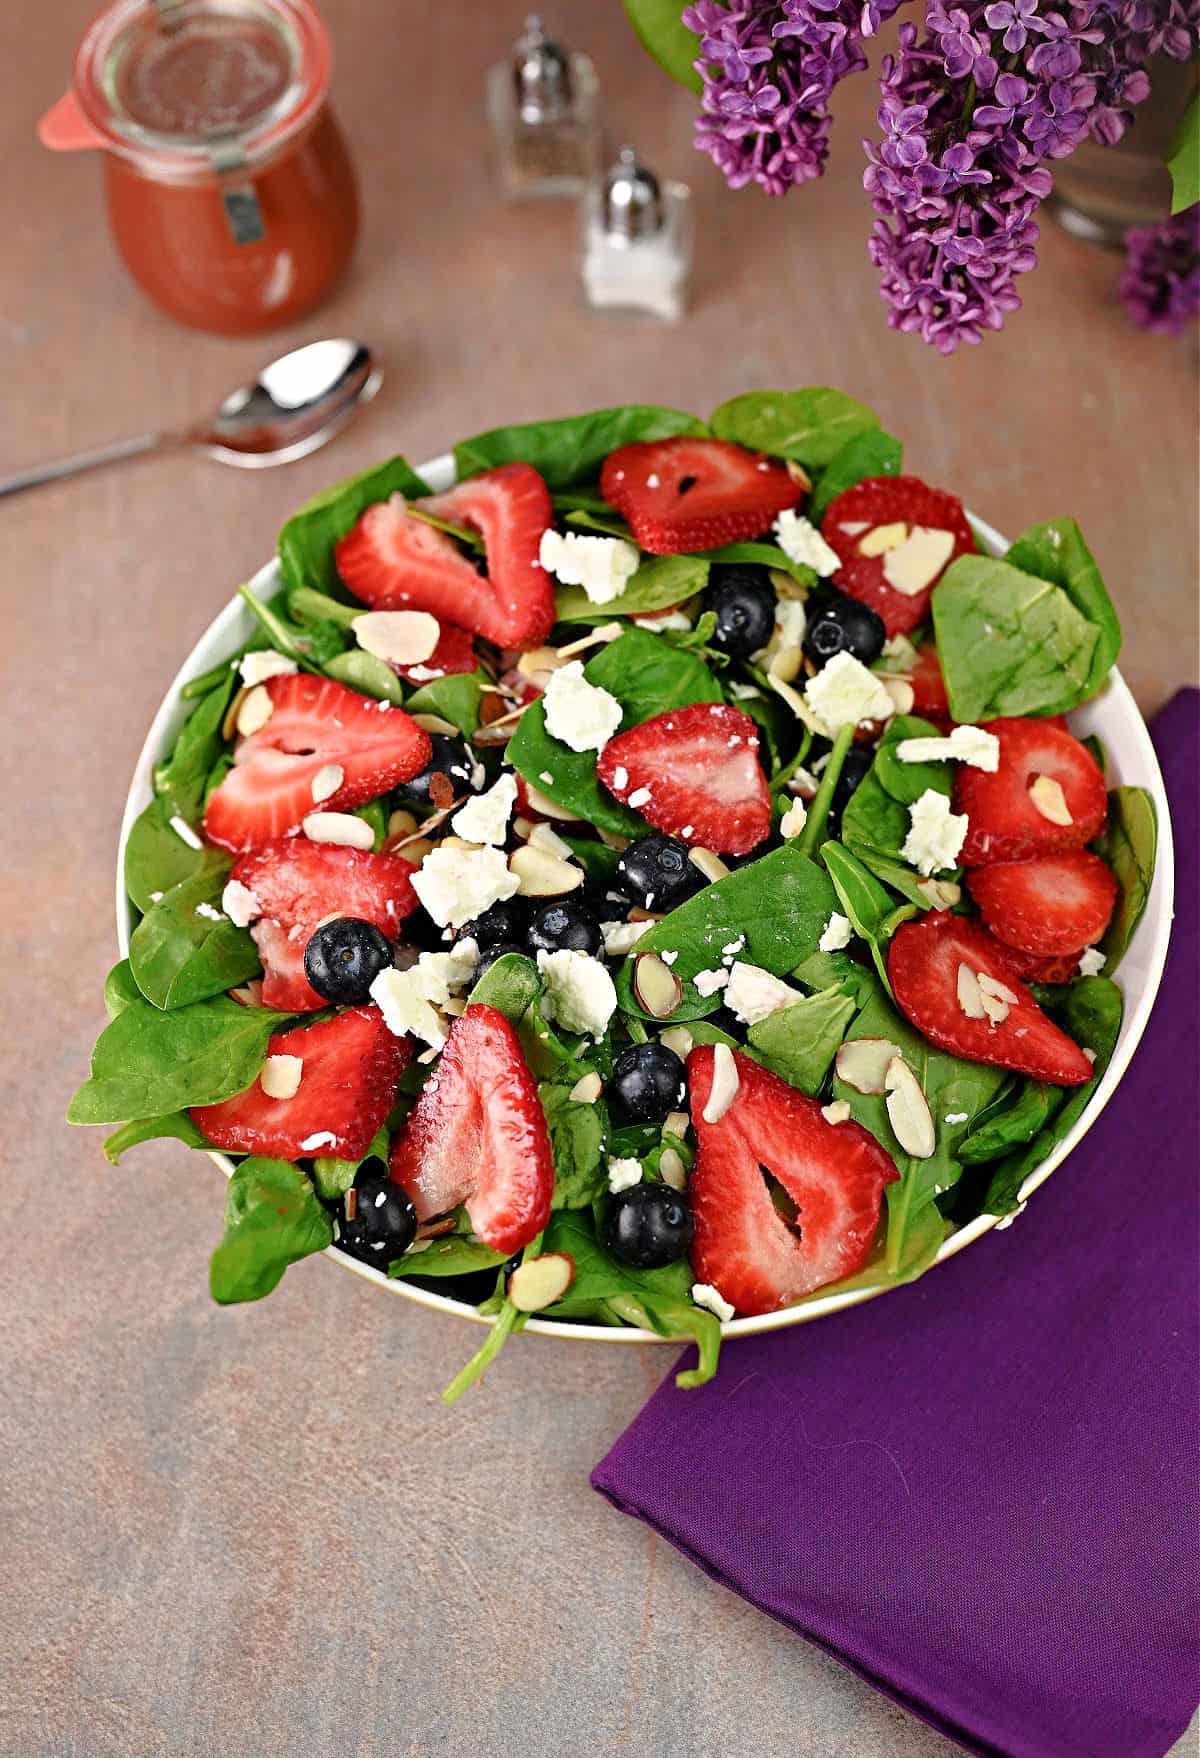 Spinach salad ready to serve with  jar of strawberry balsamic dressing nearby, ready to use.